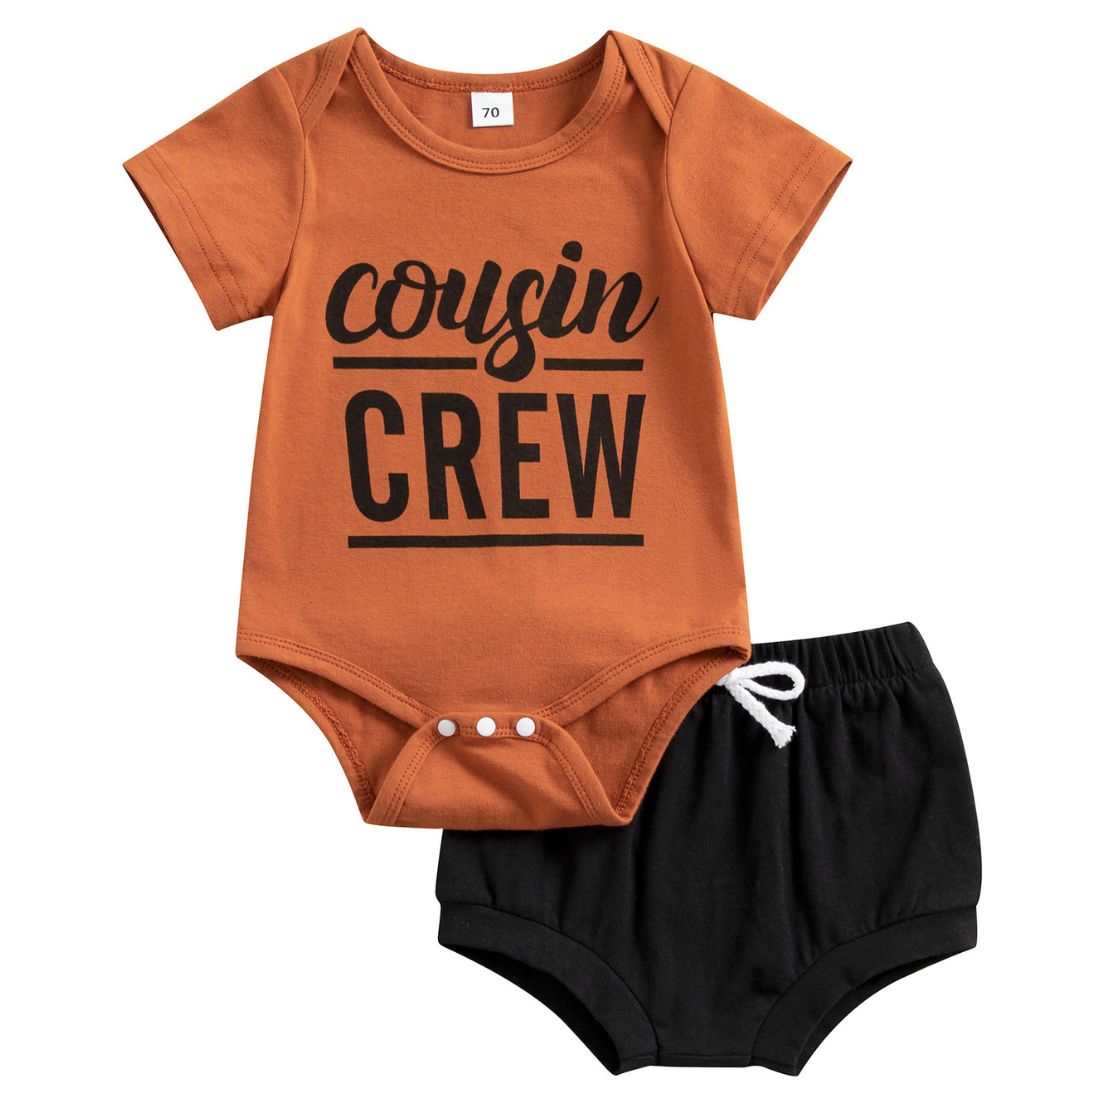 Unisex Baby Cousin Crew Bloomers Baby Set - My Trendy Youngsters | Buy on-trend and stylish Baby and Toddler Onesies and bodysuits @ My Trendy Youngsters - Dress your little one in Style @ My Trendy Youngsters 